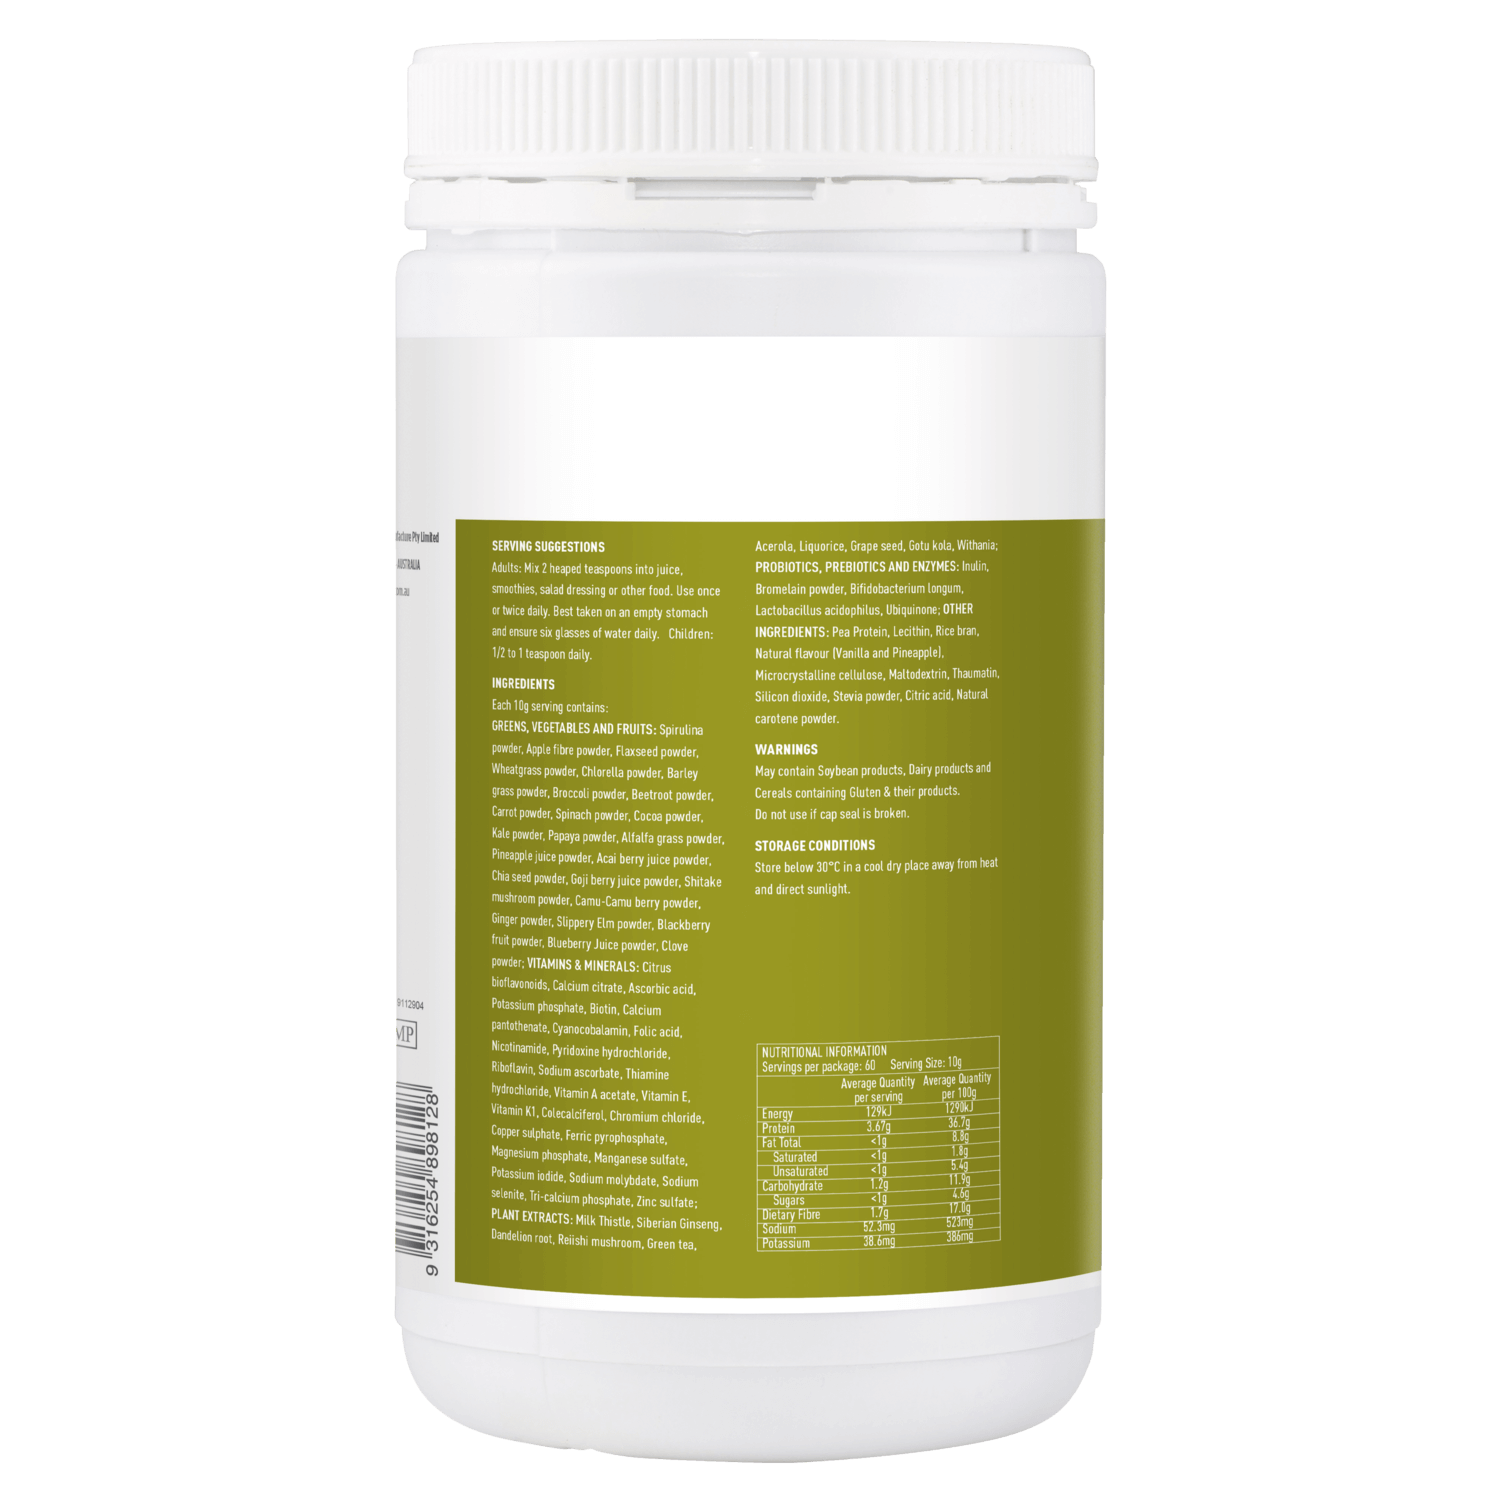 Serving Suggestions, Ingredients, Nutritional Information, Warnings, and Storage of Super Greens 600g Powder